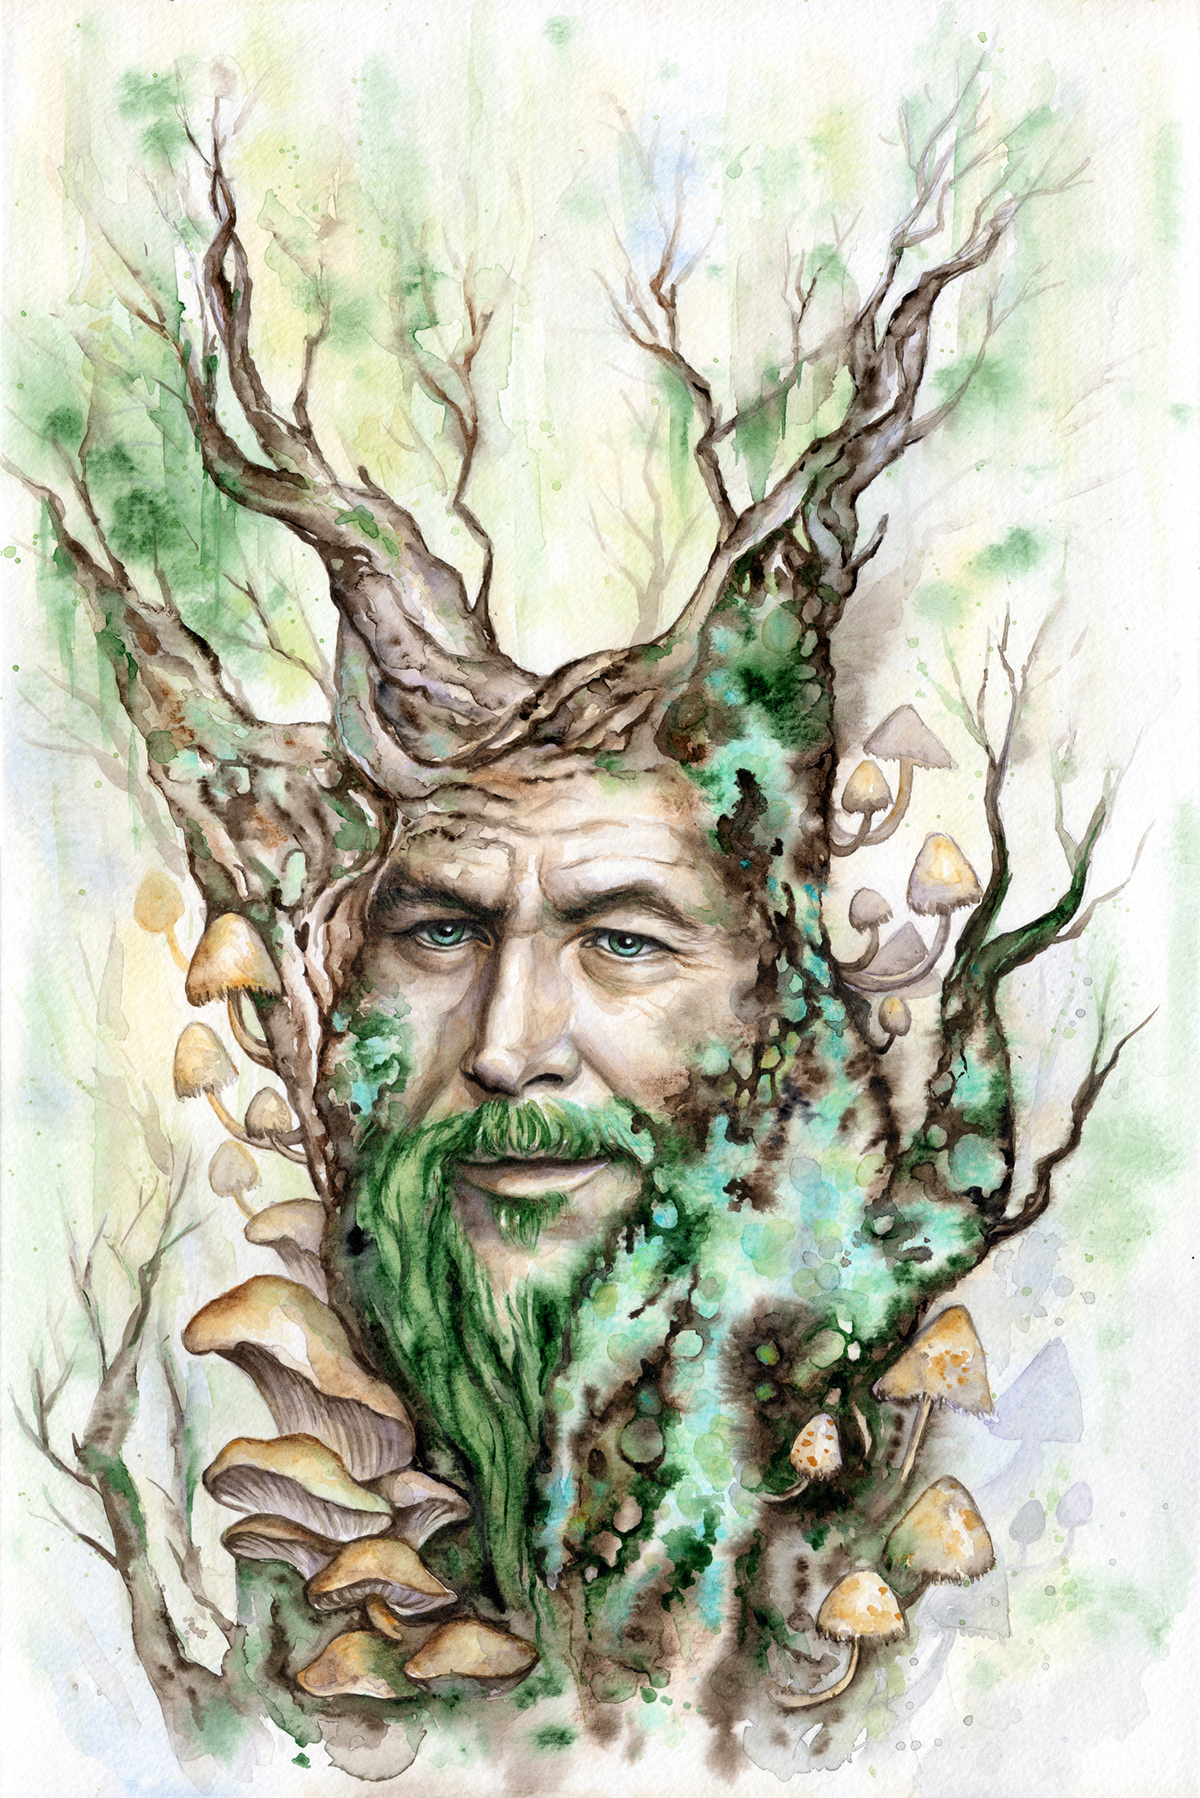 Watercolor illustration of J R Tolkien's Ent character Treebeard from "Lord of the Rings" books.